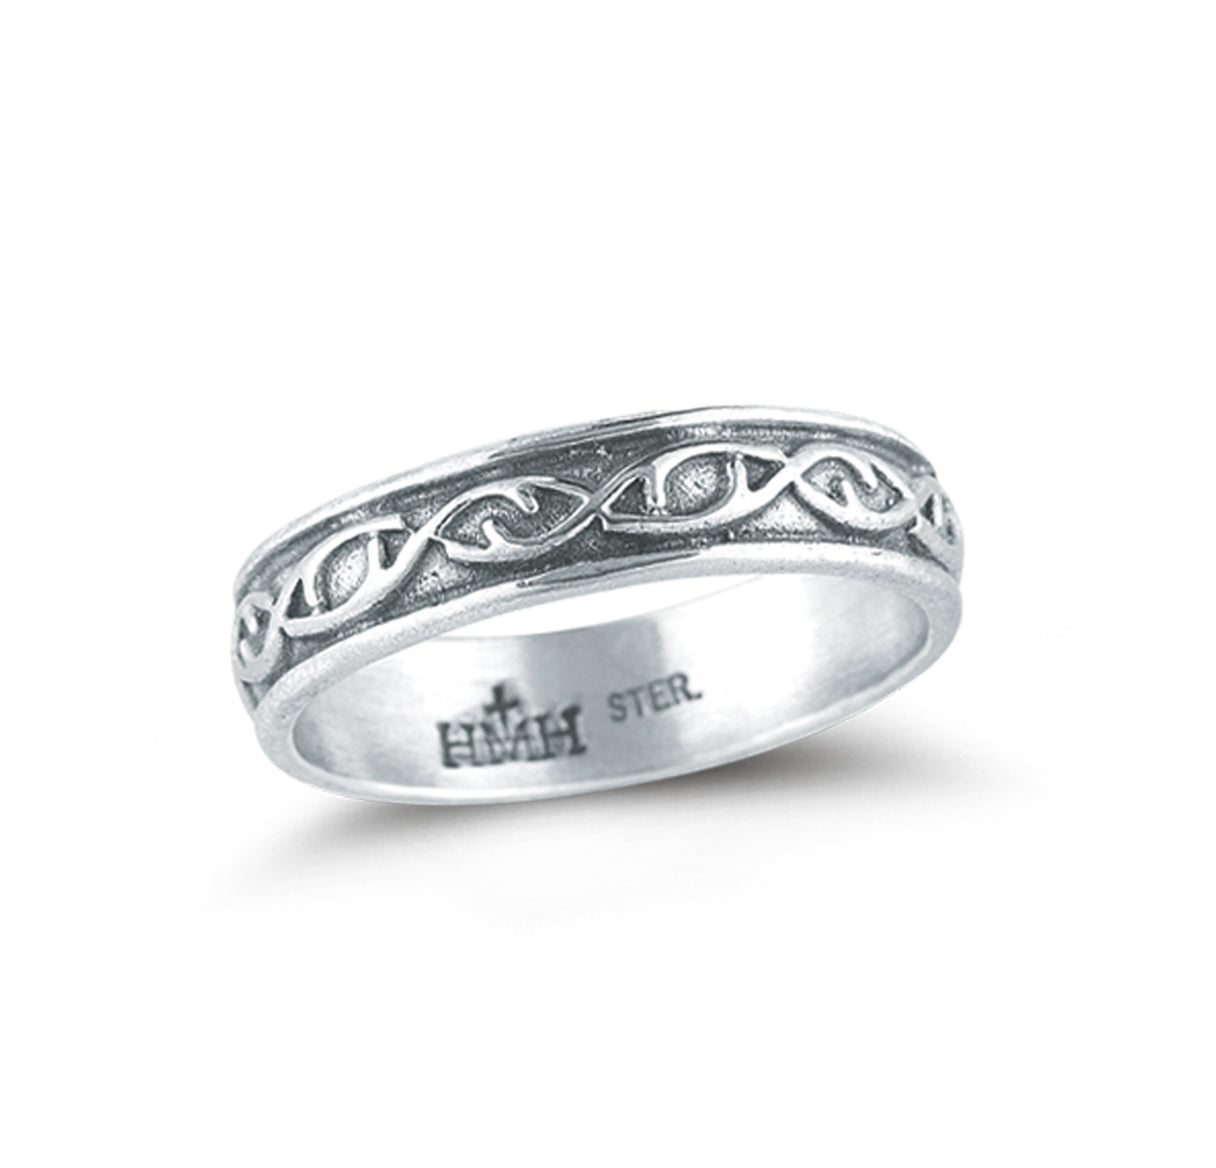 Silver "Crown of Thorns" Ring